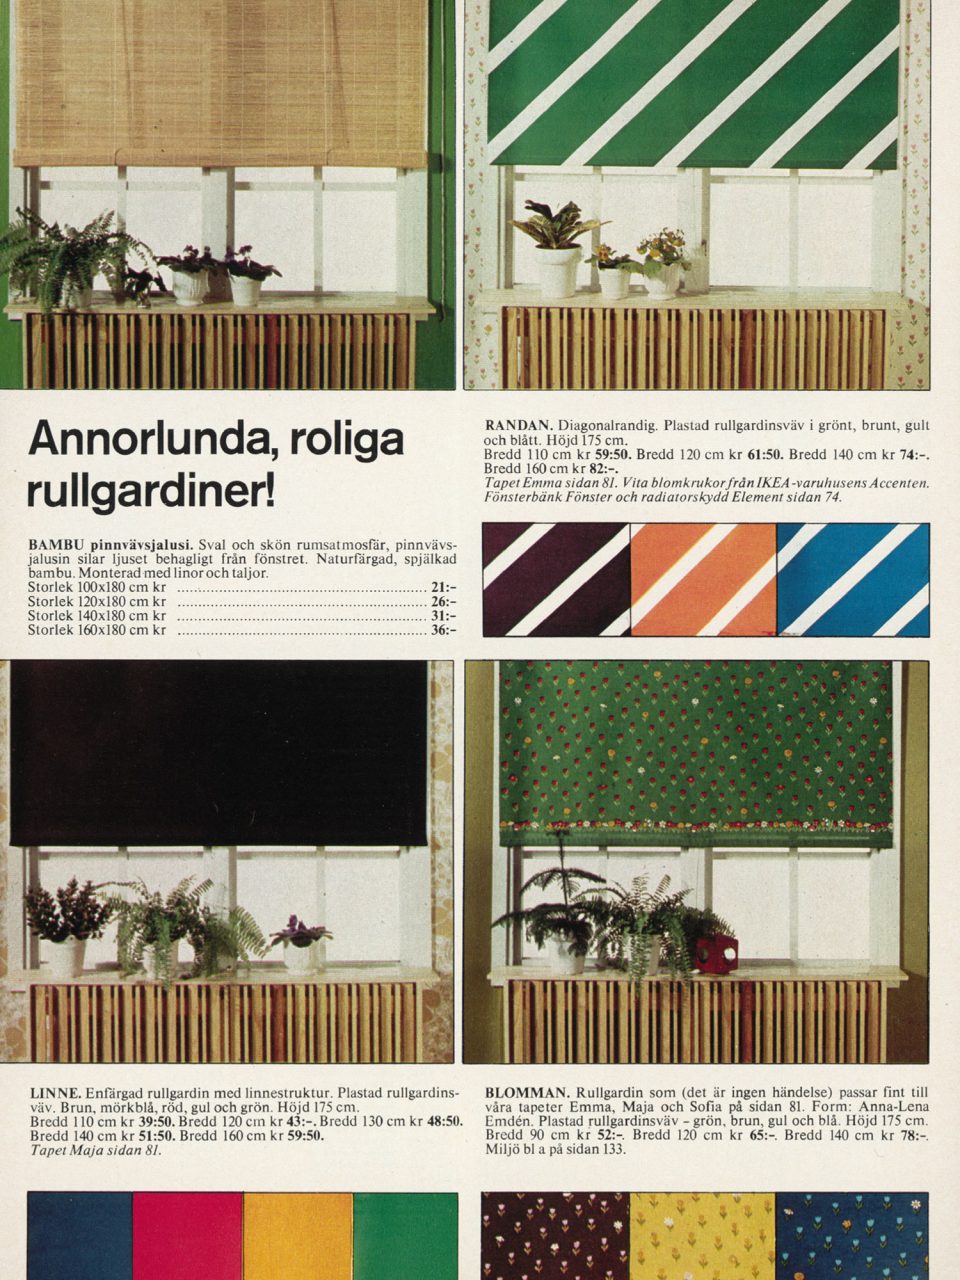 1976 IKEA catalogue page displaying roller blinds in various colours, patterns, and bamboo.